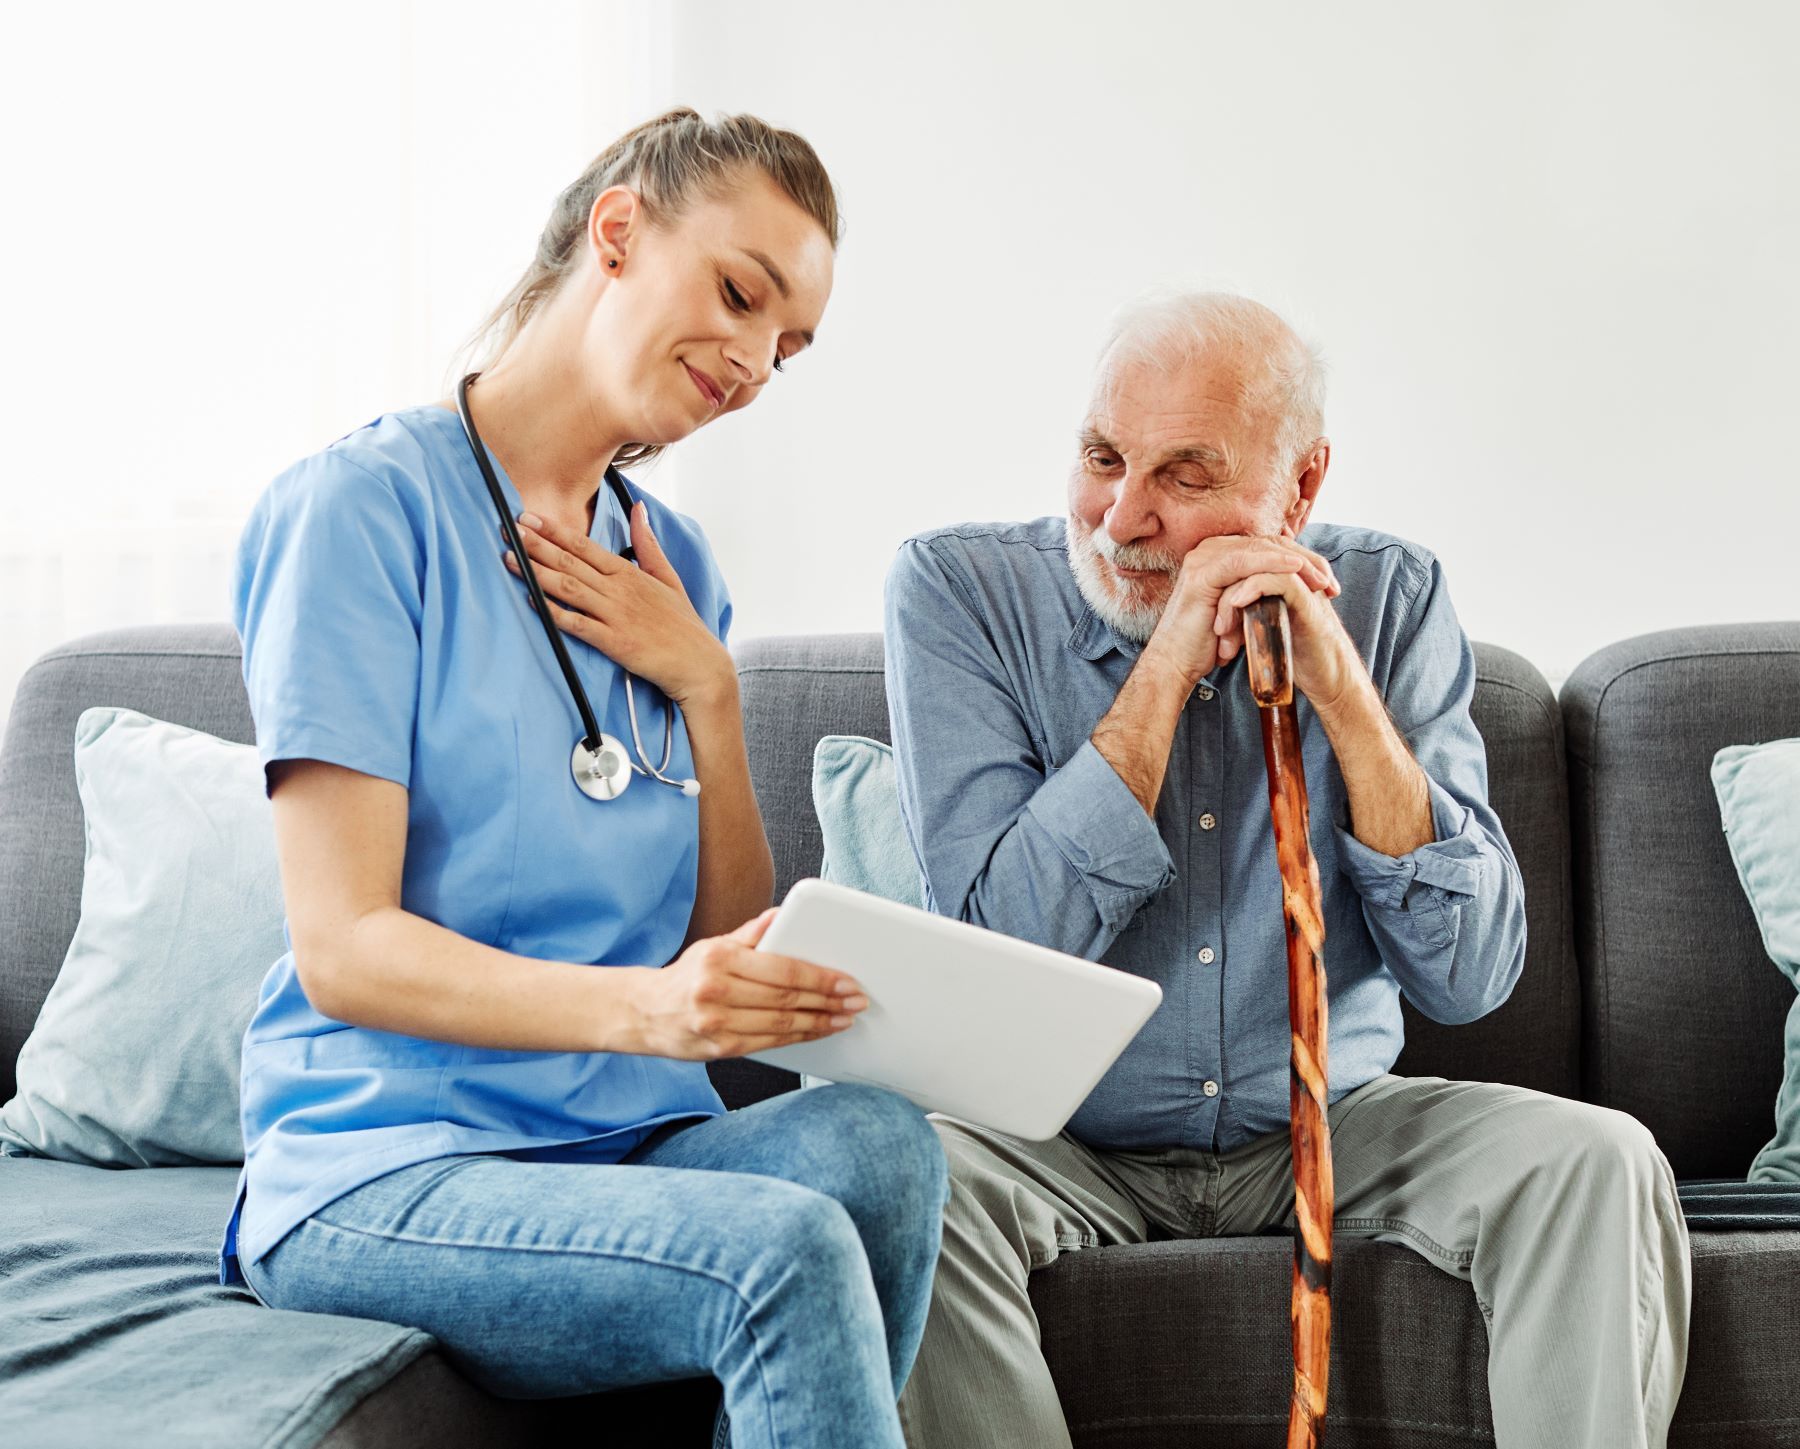 caregiver showing tablet to senior patient on her left while both sit on couch